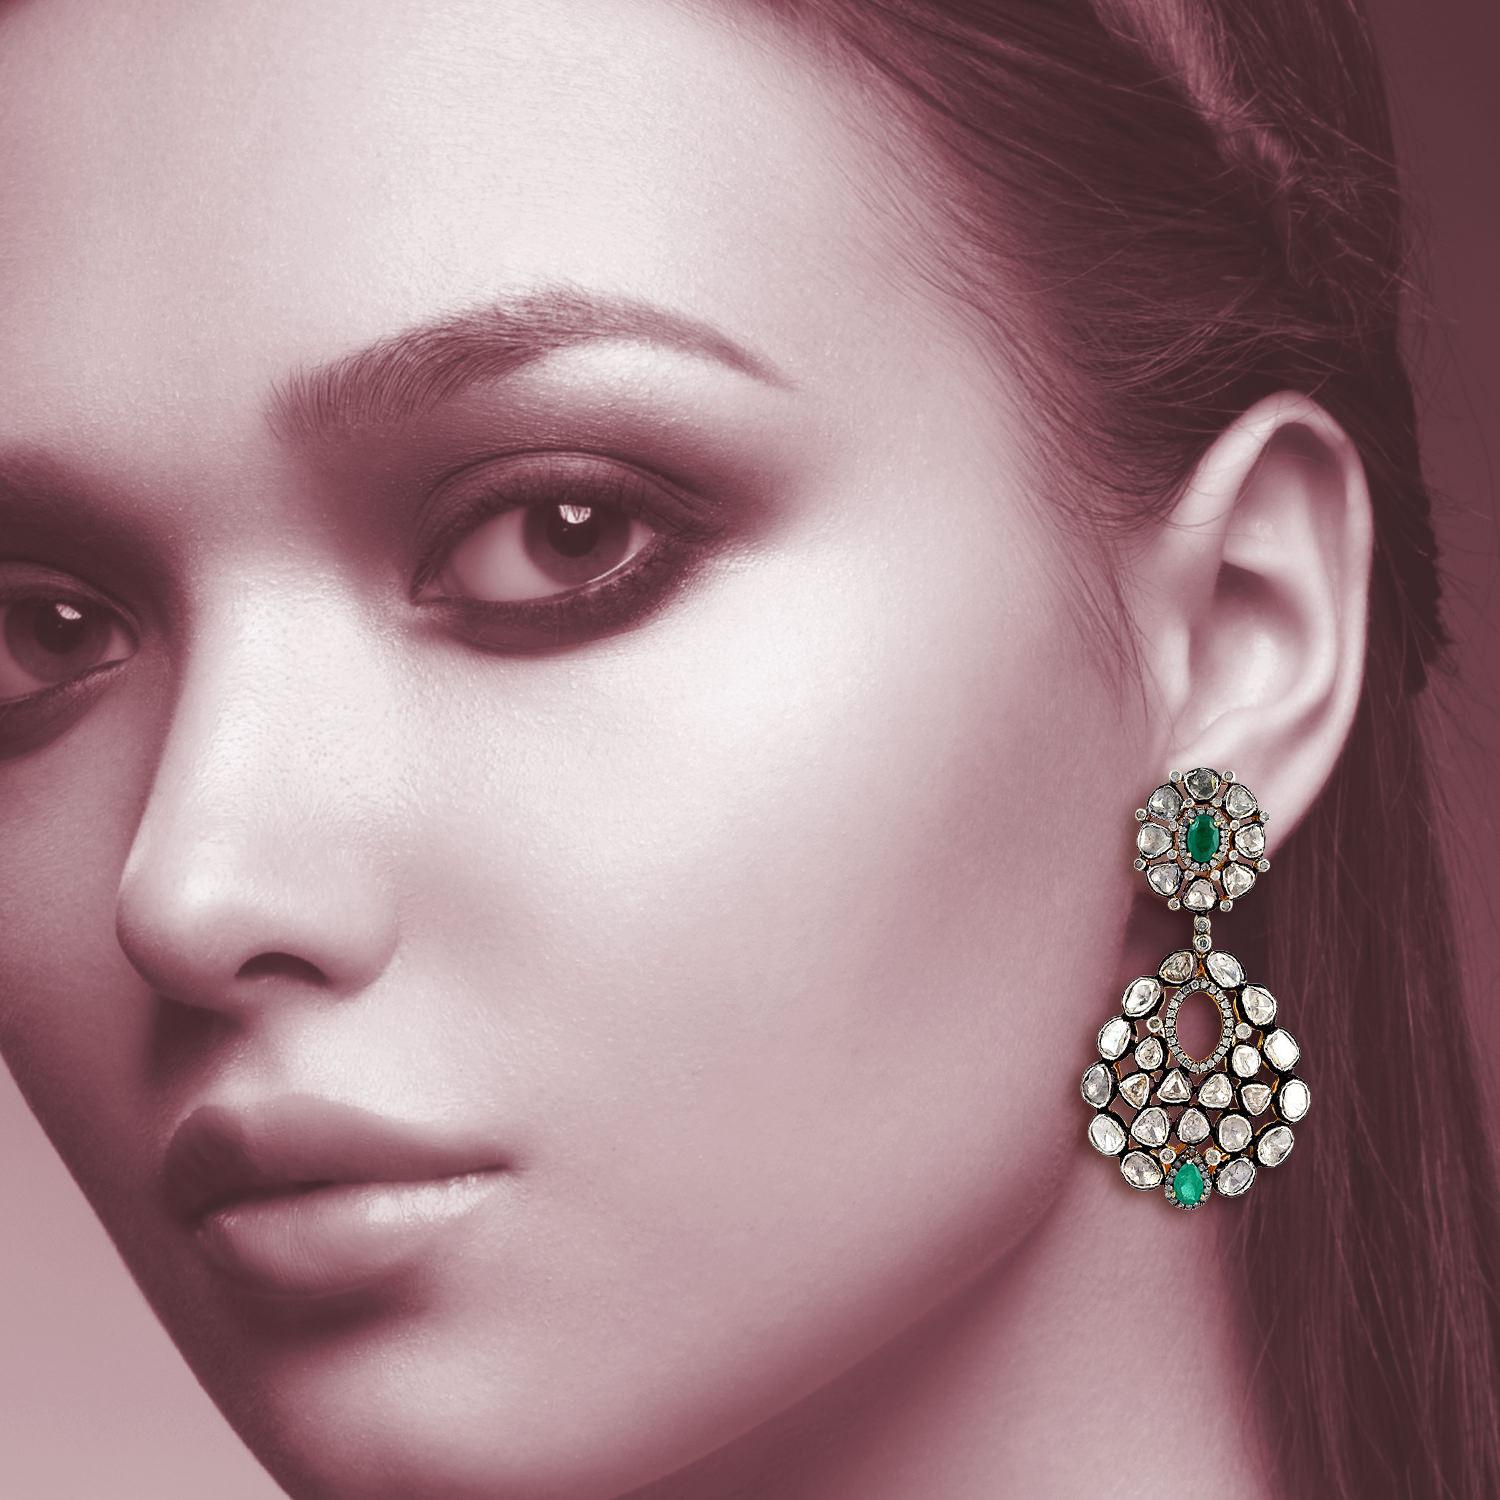 Inspired by the Mughal Era & Royal heritage these stunning earrings are handcrafted in 14-karat gold & sterling silver.  They have a chandelier-style silhouette that's encrusted with 1.52 carats emeralds and 11.8 carats rose cut diamonds with